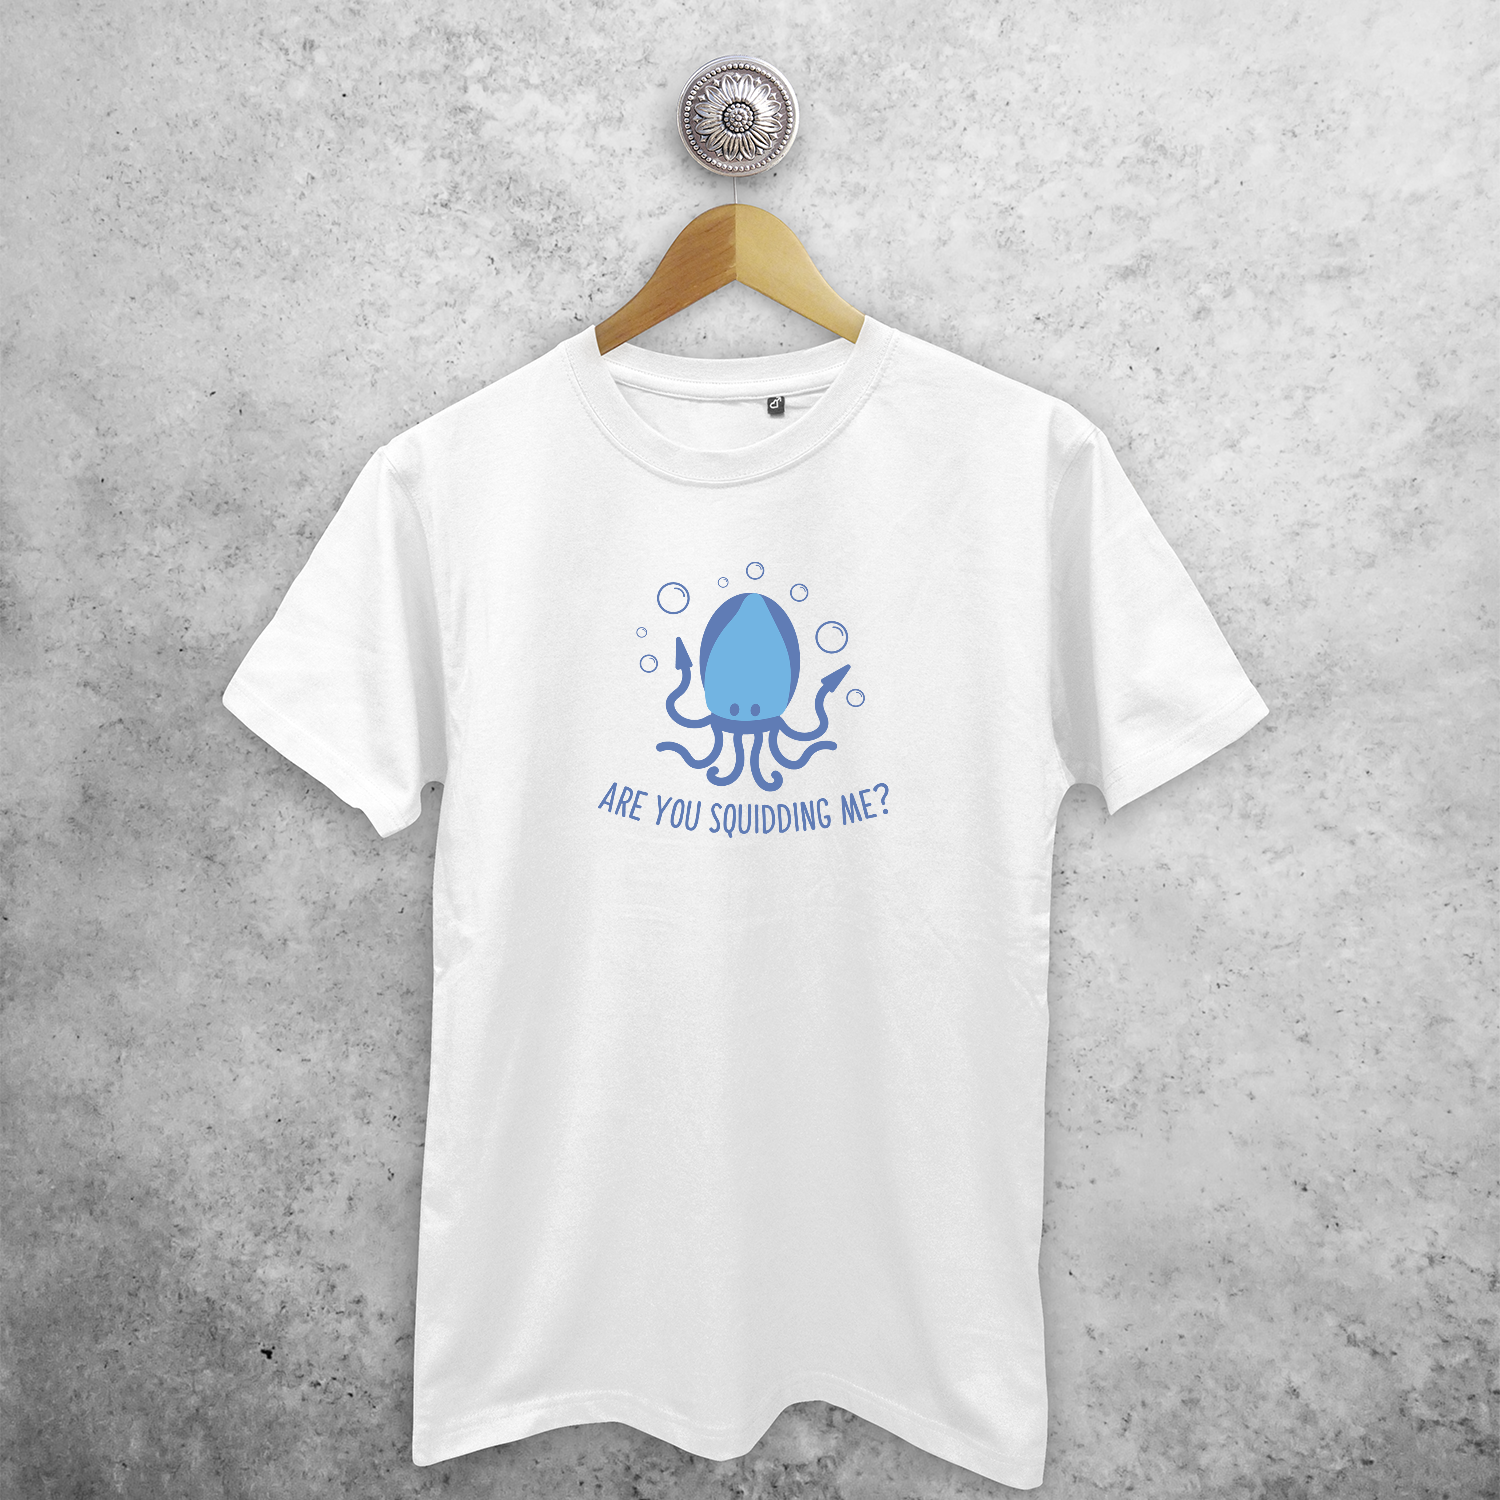 Are you squidding me?' volwassene shirt